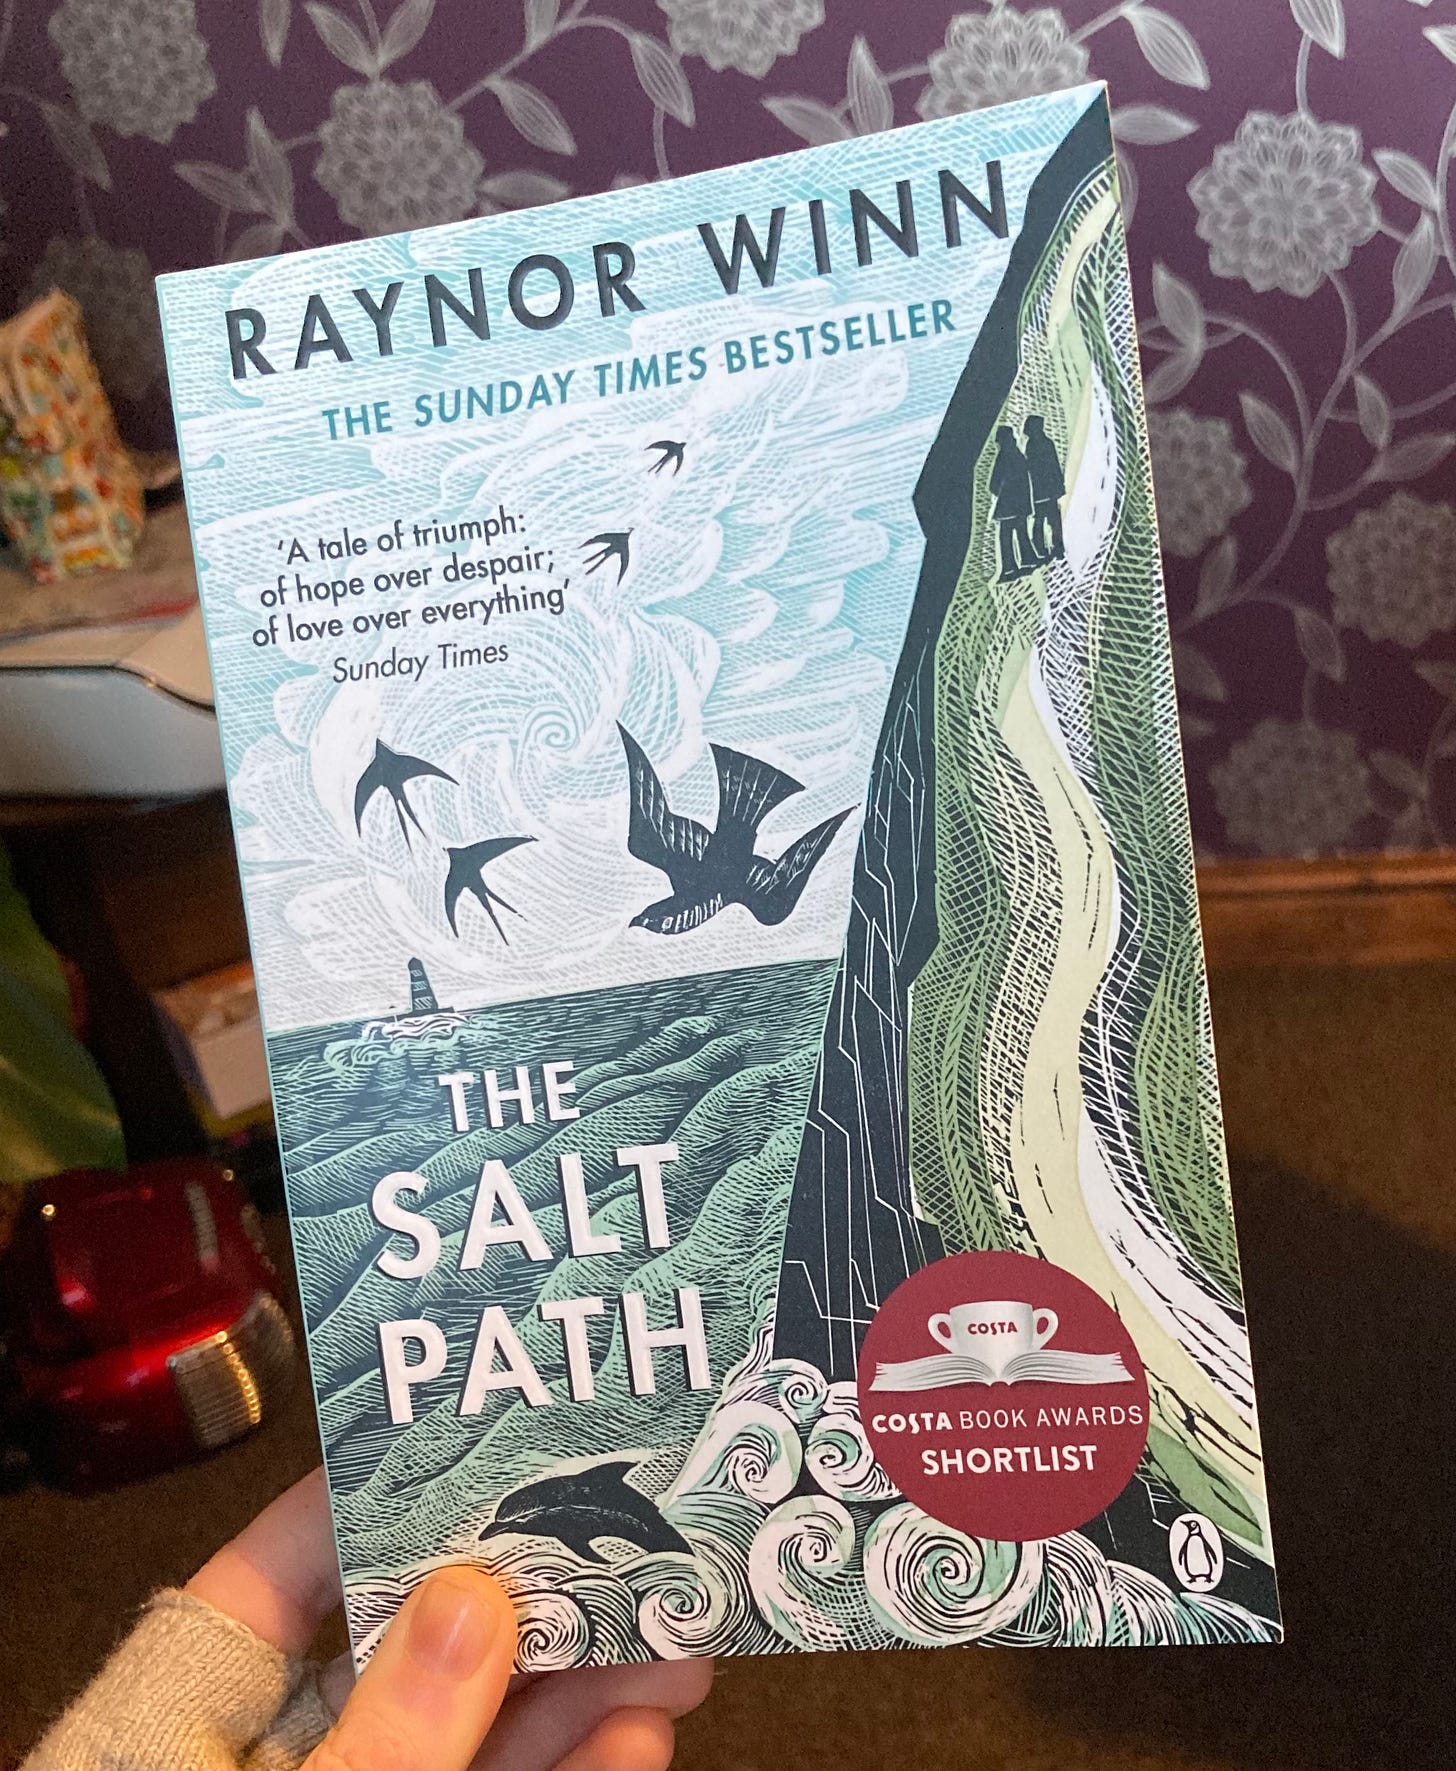 The photo shows a copy of The Salt Path by Raynor Winn, which is being held by Becky.